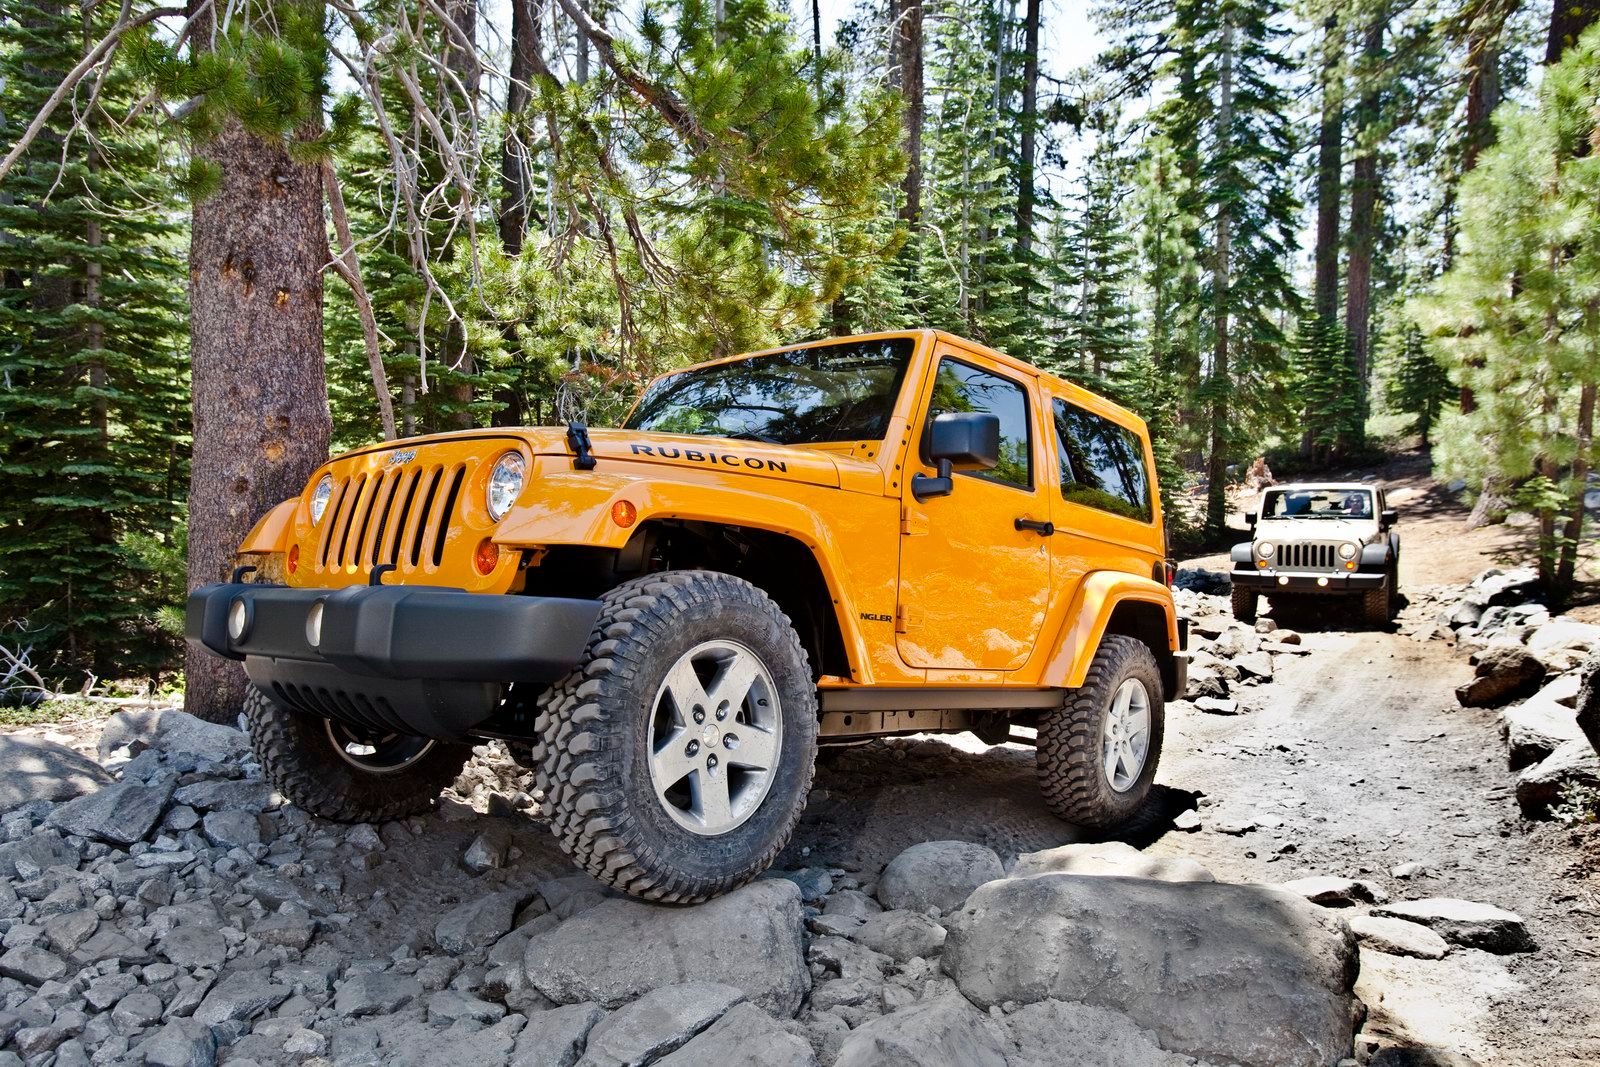 2019 Next-Generation Jeep Wrangler Will Keep Solid Axles